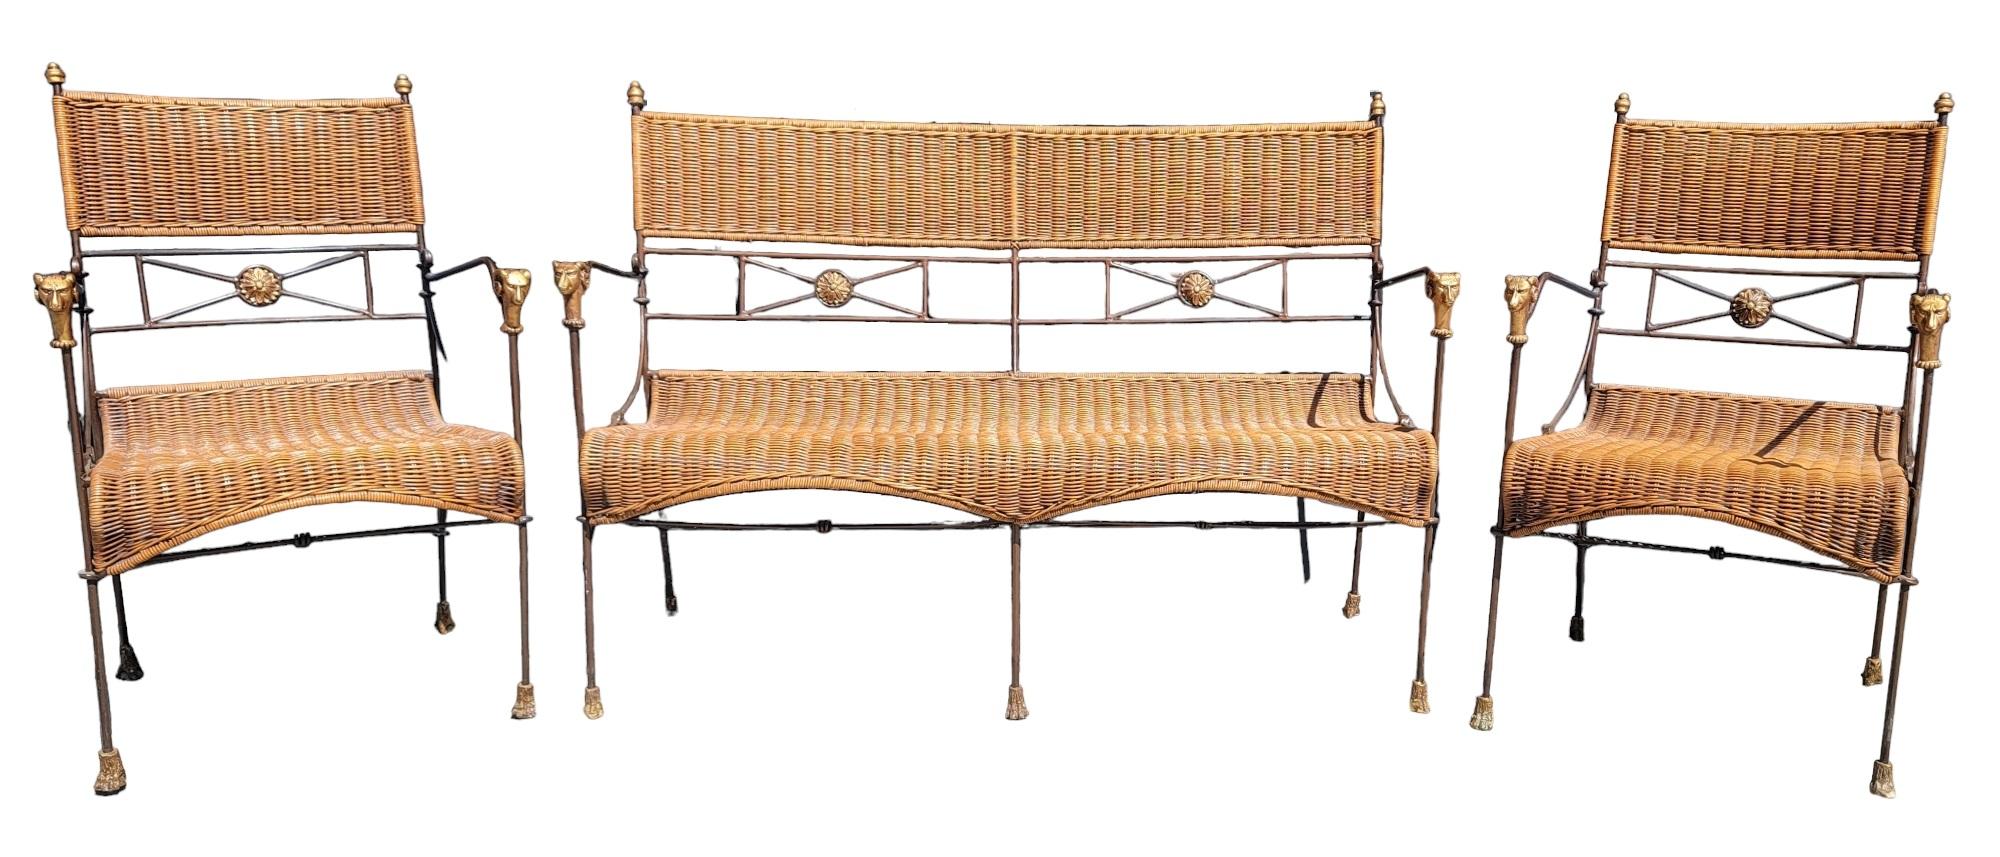 Set of Three Iron And Wicker Settee And Chair By Giacometti. There are rams heads on the arm rests. In the back rest there is a sunburst/sunflower emblem/design on the backing. 
The top of the chairs have small finials attached. The iron under the